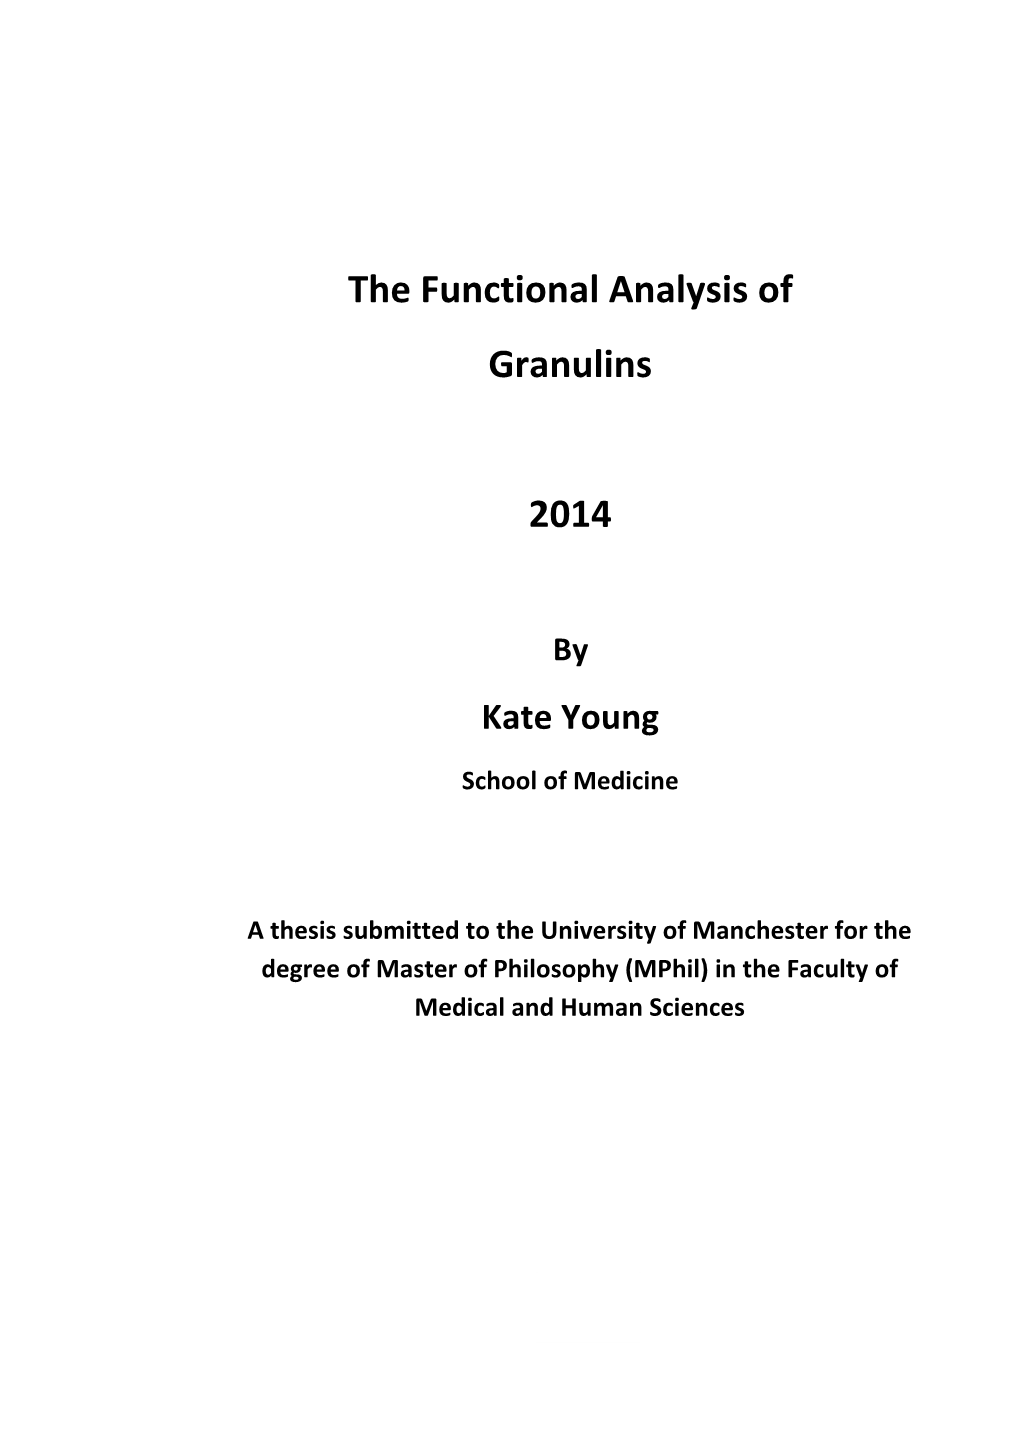 The Functional Analysis of Granulins